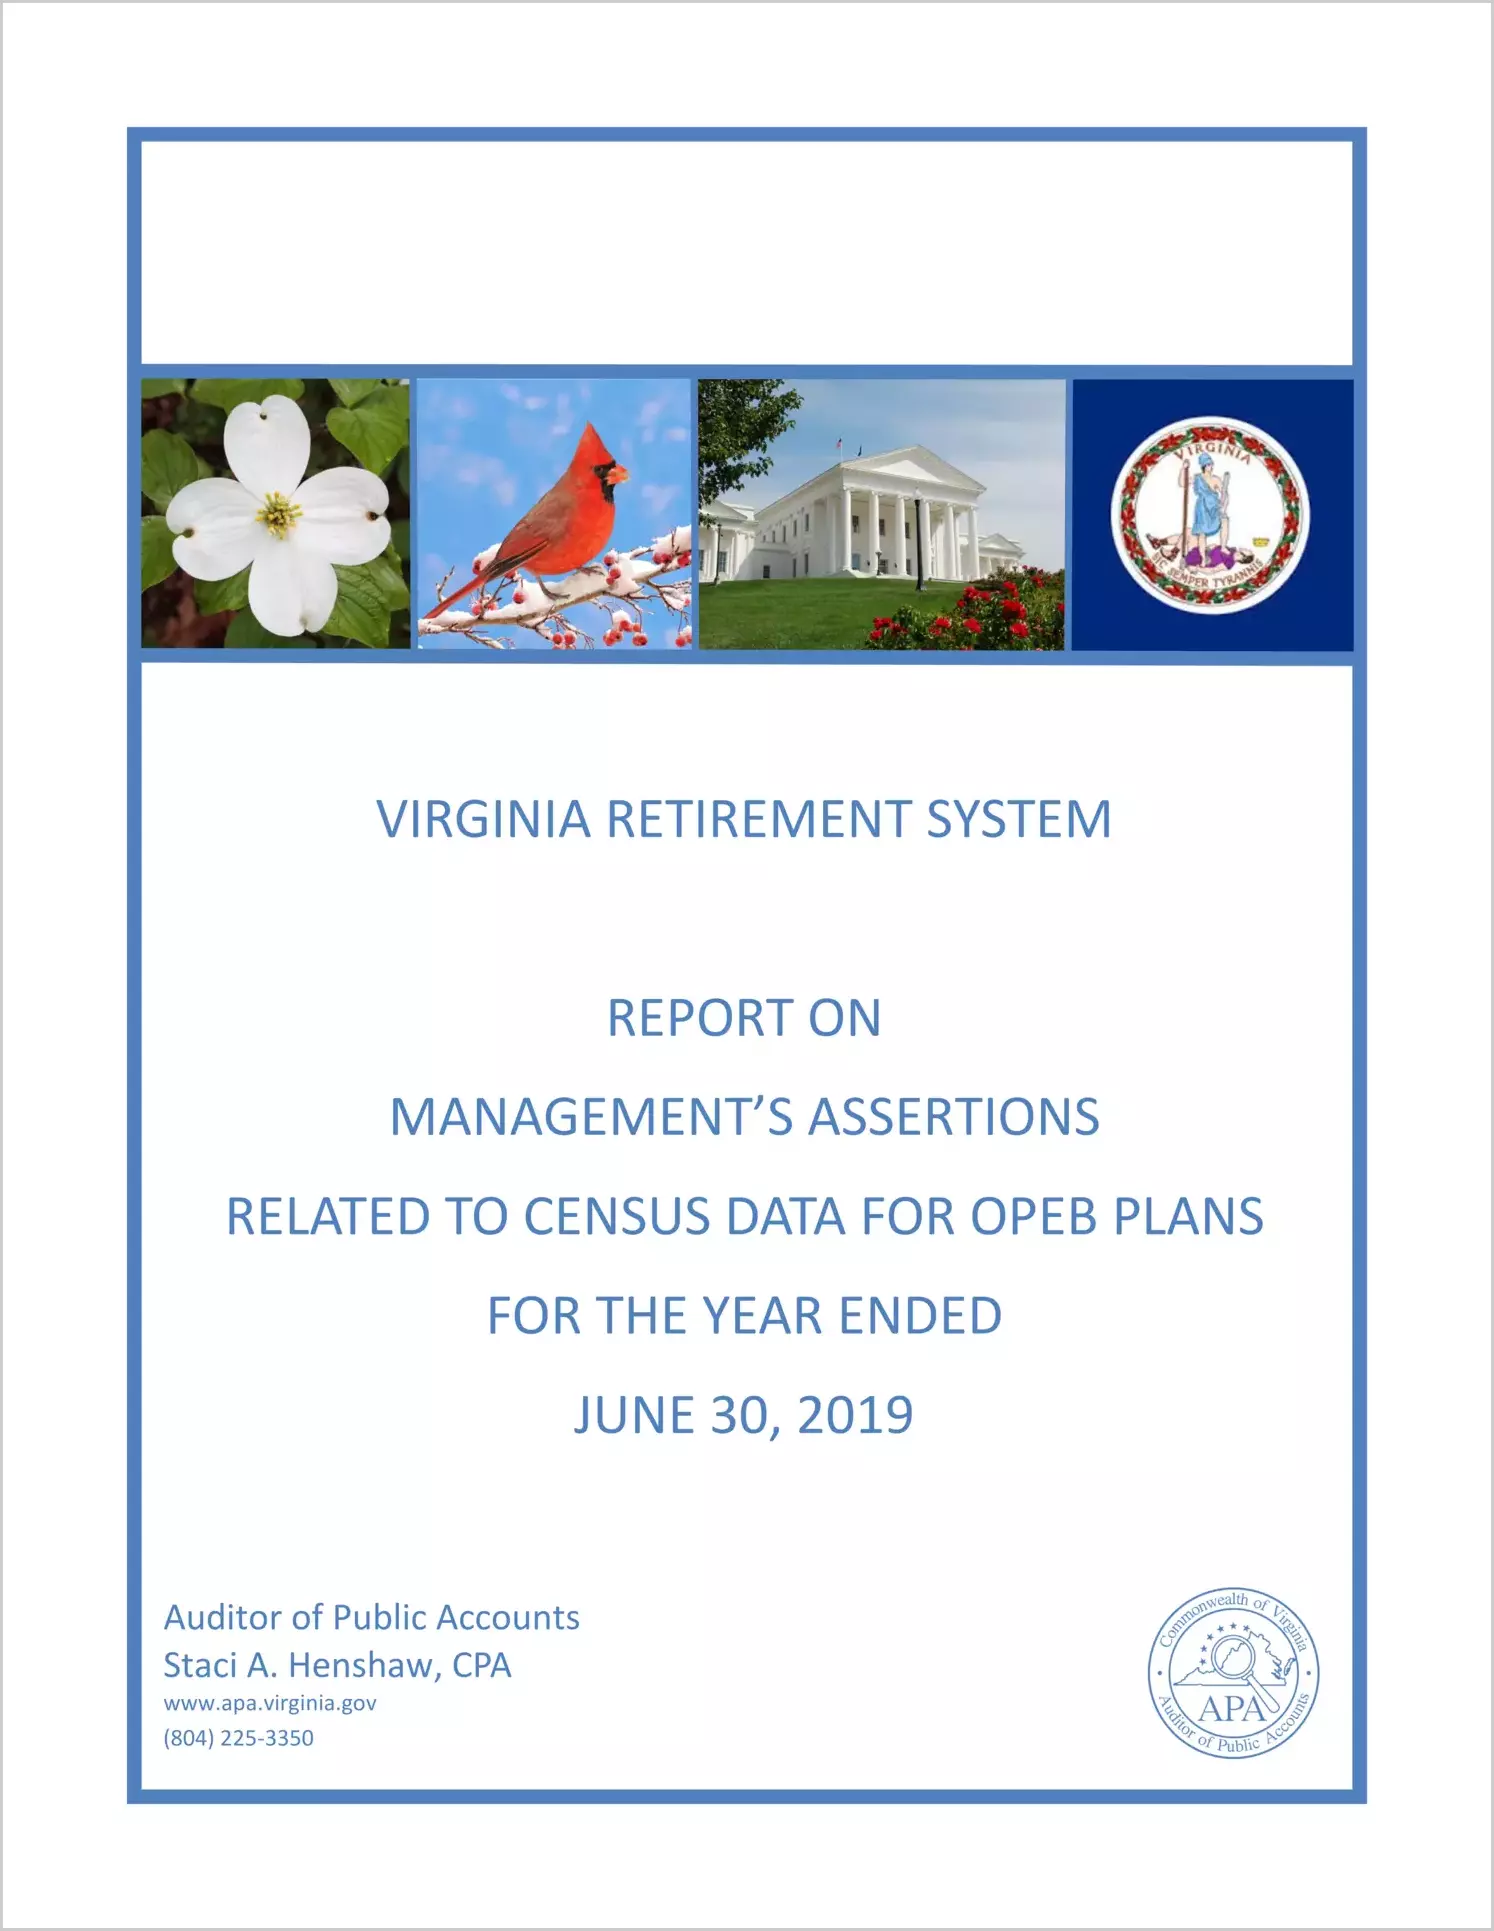 Virginia Retirement System Management's Assertions Related to Census Data for OPEB Plans for the year ended June 30, 2019